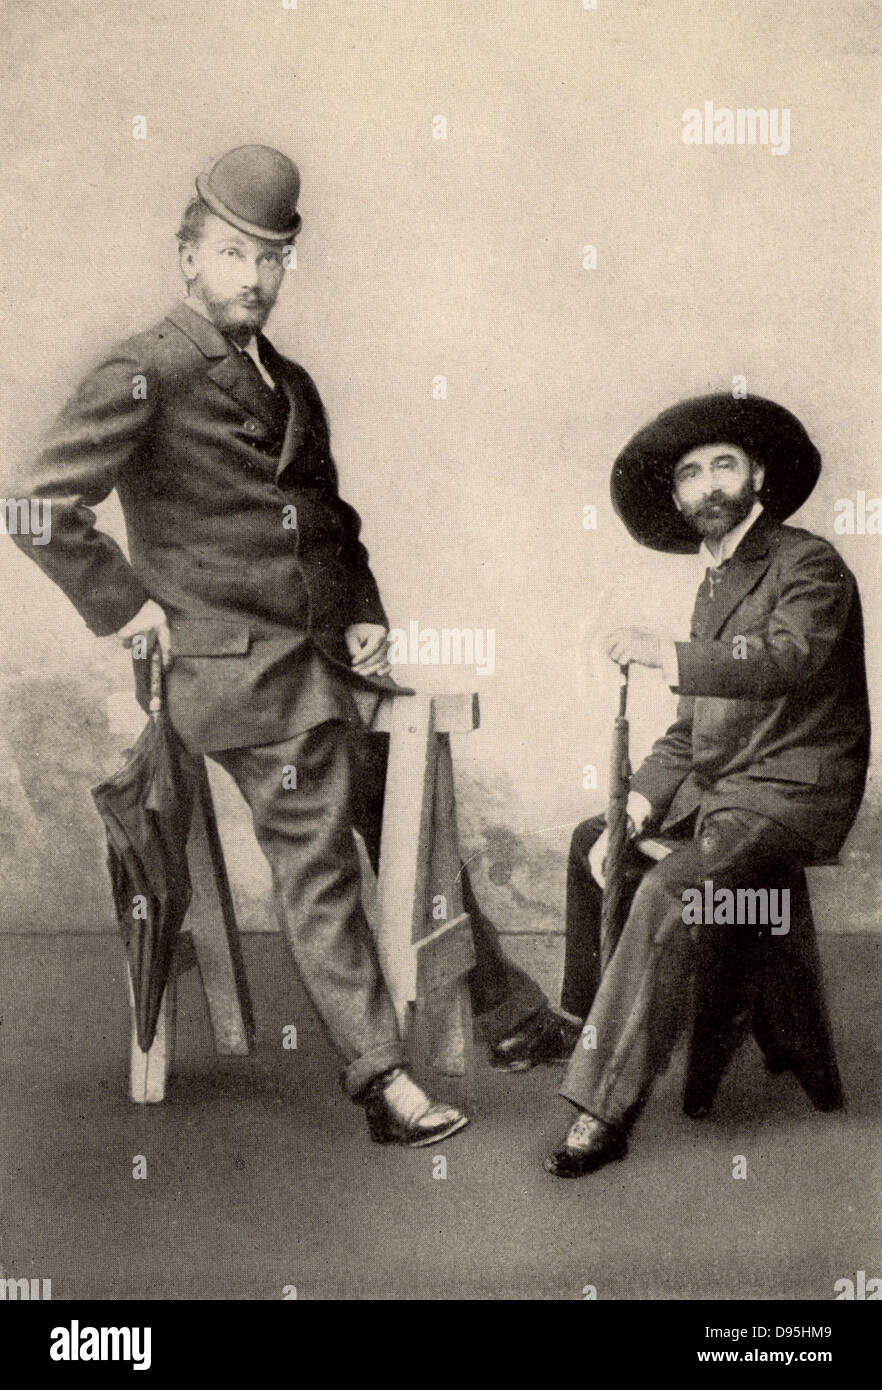 Max Kalbeck, biographer of Johannes Brahms, left, and Brahms' Viennese friend Dr Otto Bauer, wearing each other's hats.  From photograph taken in Ischl, 1892. Stock Photo